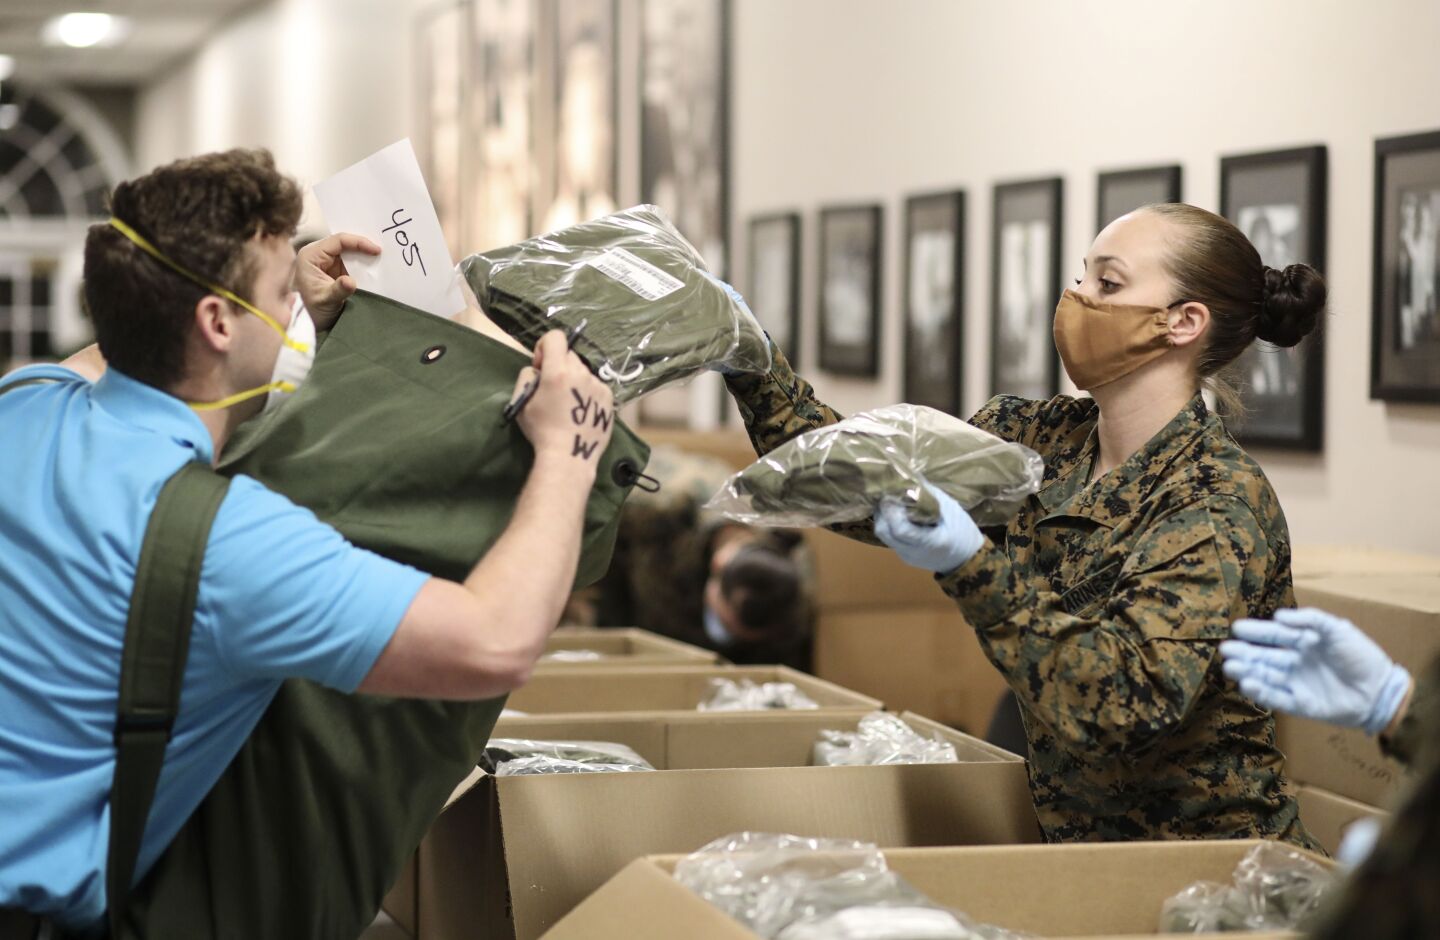 Sgt. Briana Lomeli hands a recruit clothing items at the Marine Corp Recruit Depot(MCRD) on Monday, April 13, 2020. New COVID-19 distancing practices have gone into effect for new recruits such as standing six feet apart, health screening and a 14-day quarantine period before boot camp begins.